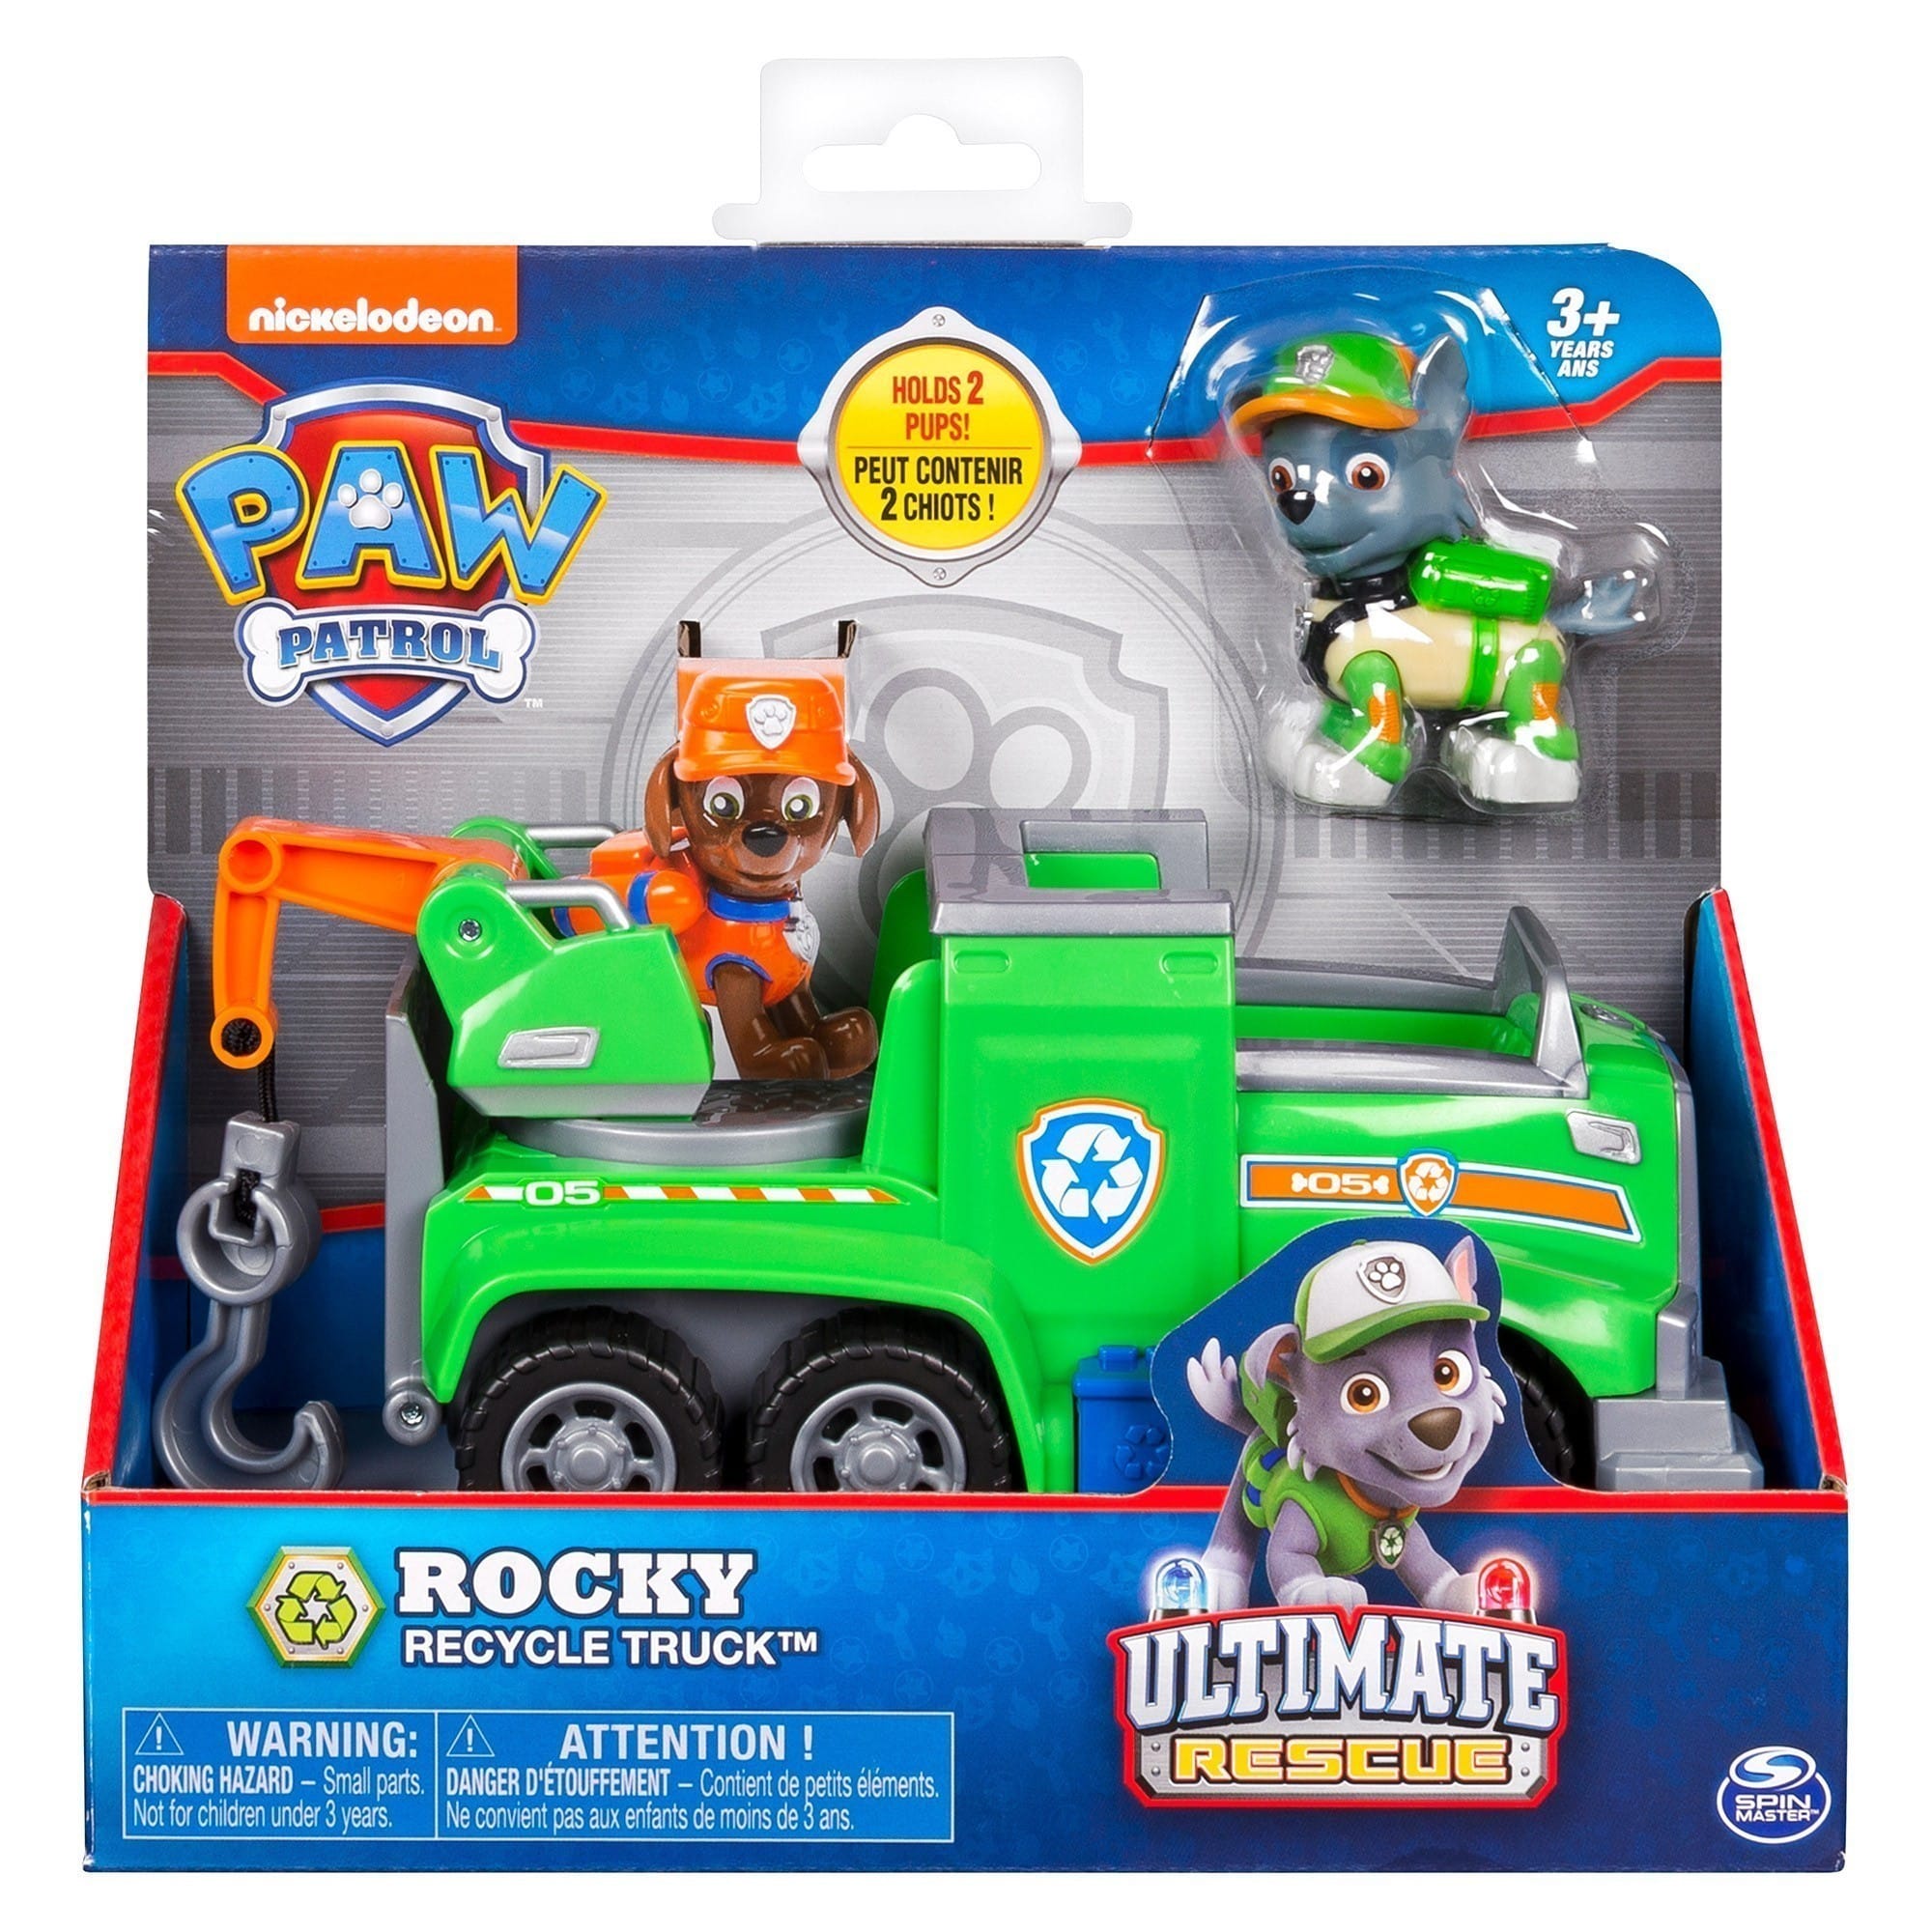 Nickelodeon - Paw Patrol Ultimate Rescue - Rocky Recycle Truck